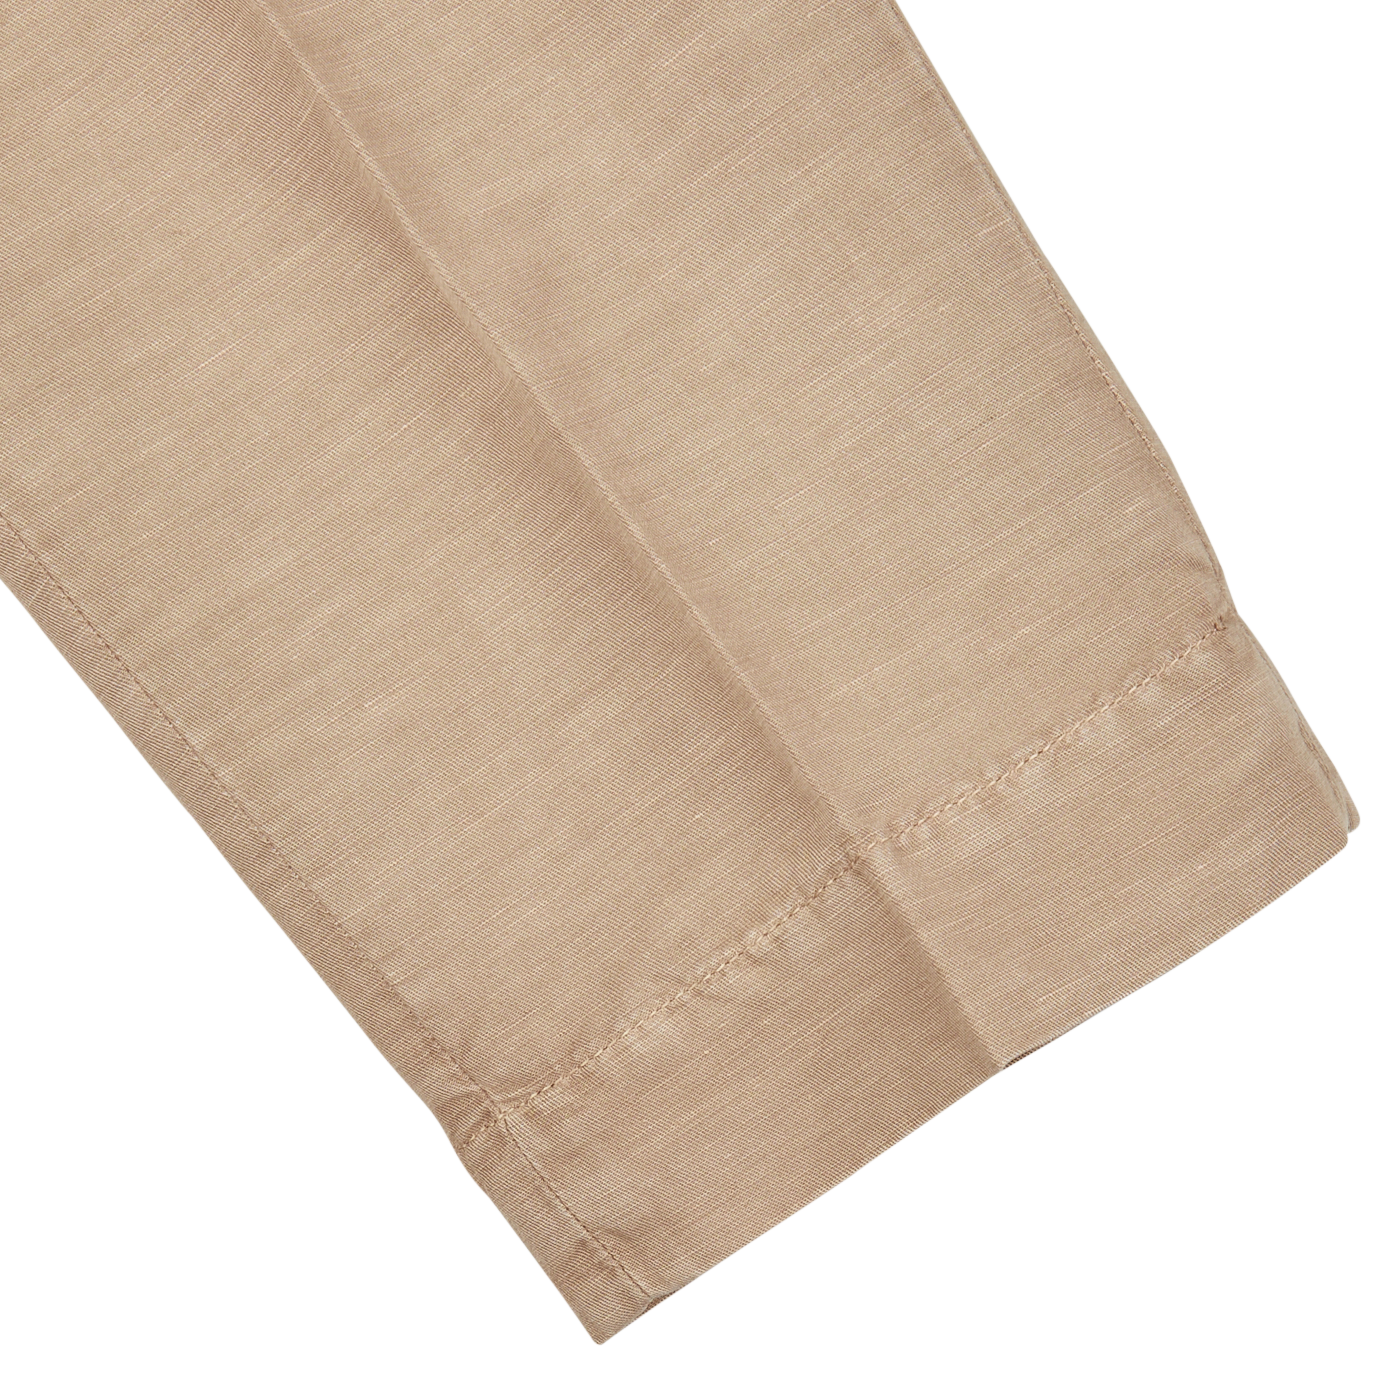 Light Beige Washed Chinolino Suit with a simple hem on a white background by Slowear.